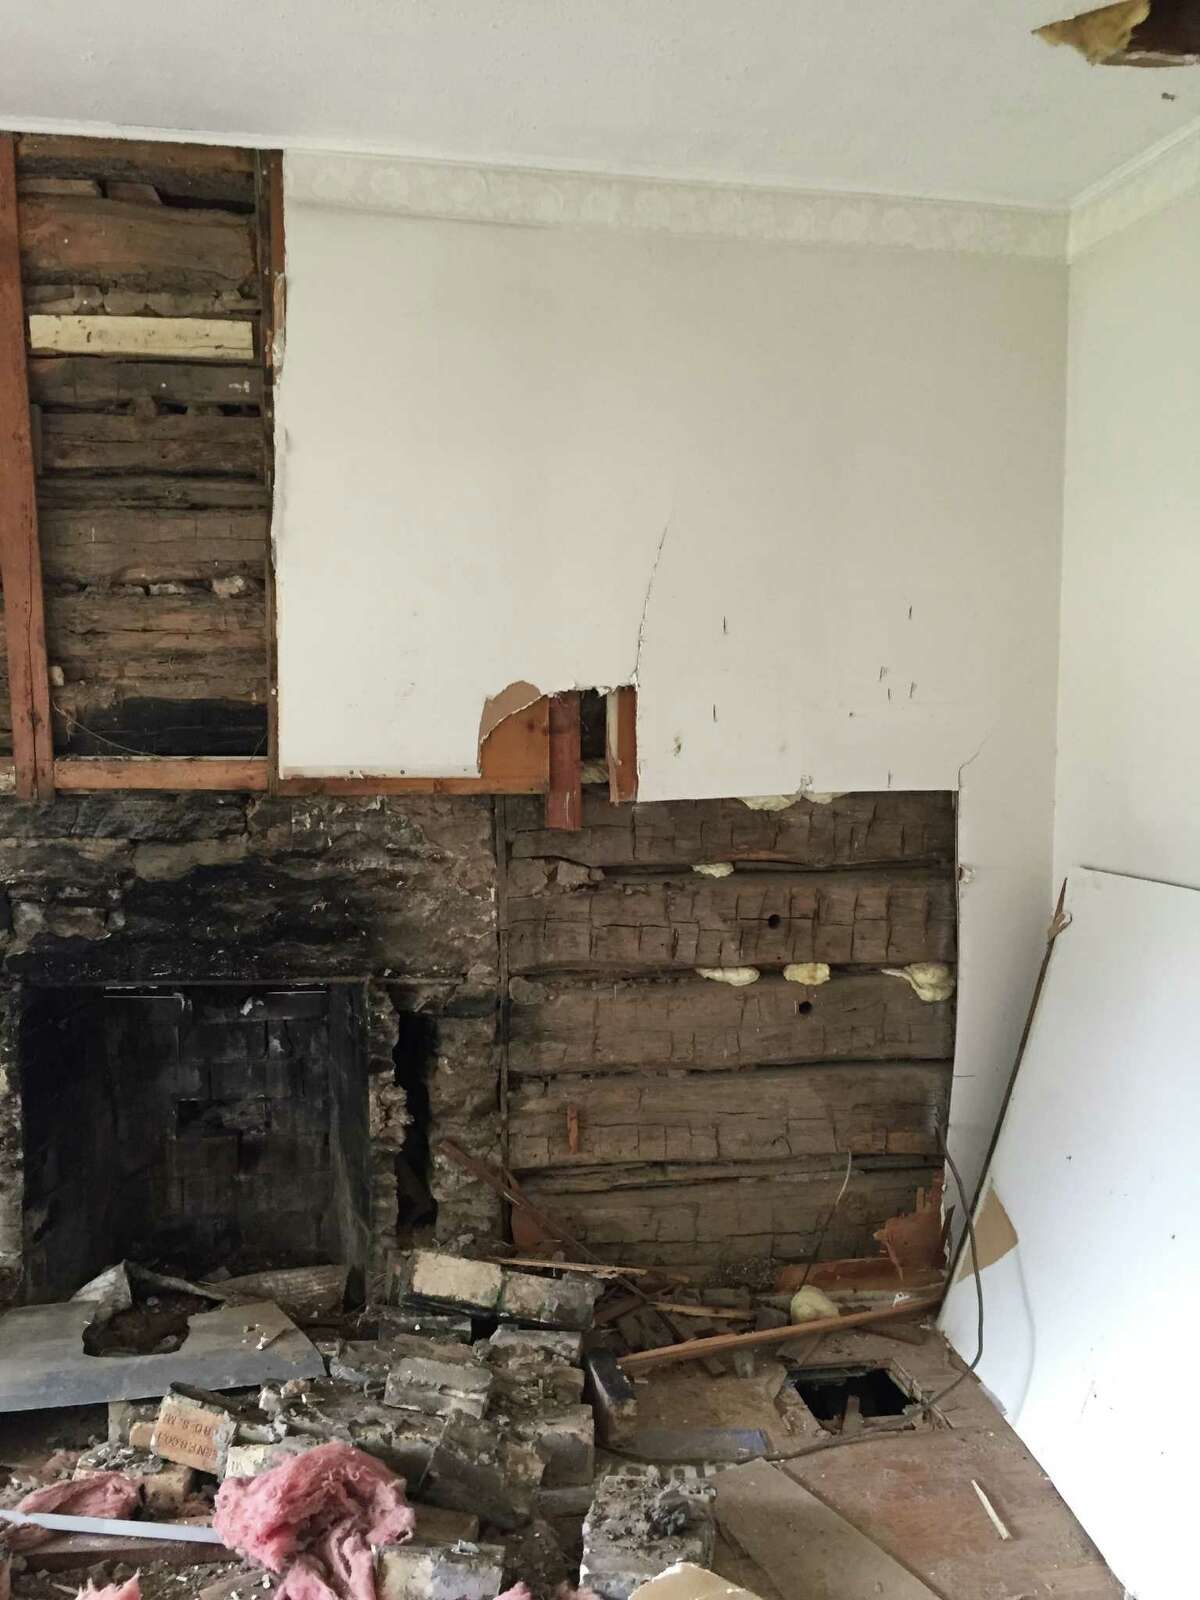 A land developer found a log cabin dating back to the 1860s while tearing out the walls of a home in Flower Mound he acquired as part of a land development plan.